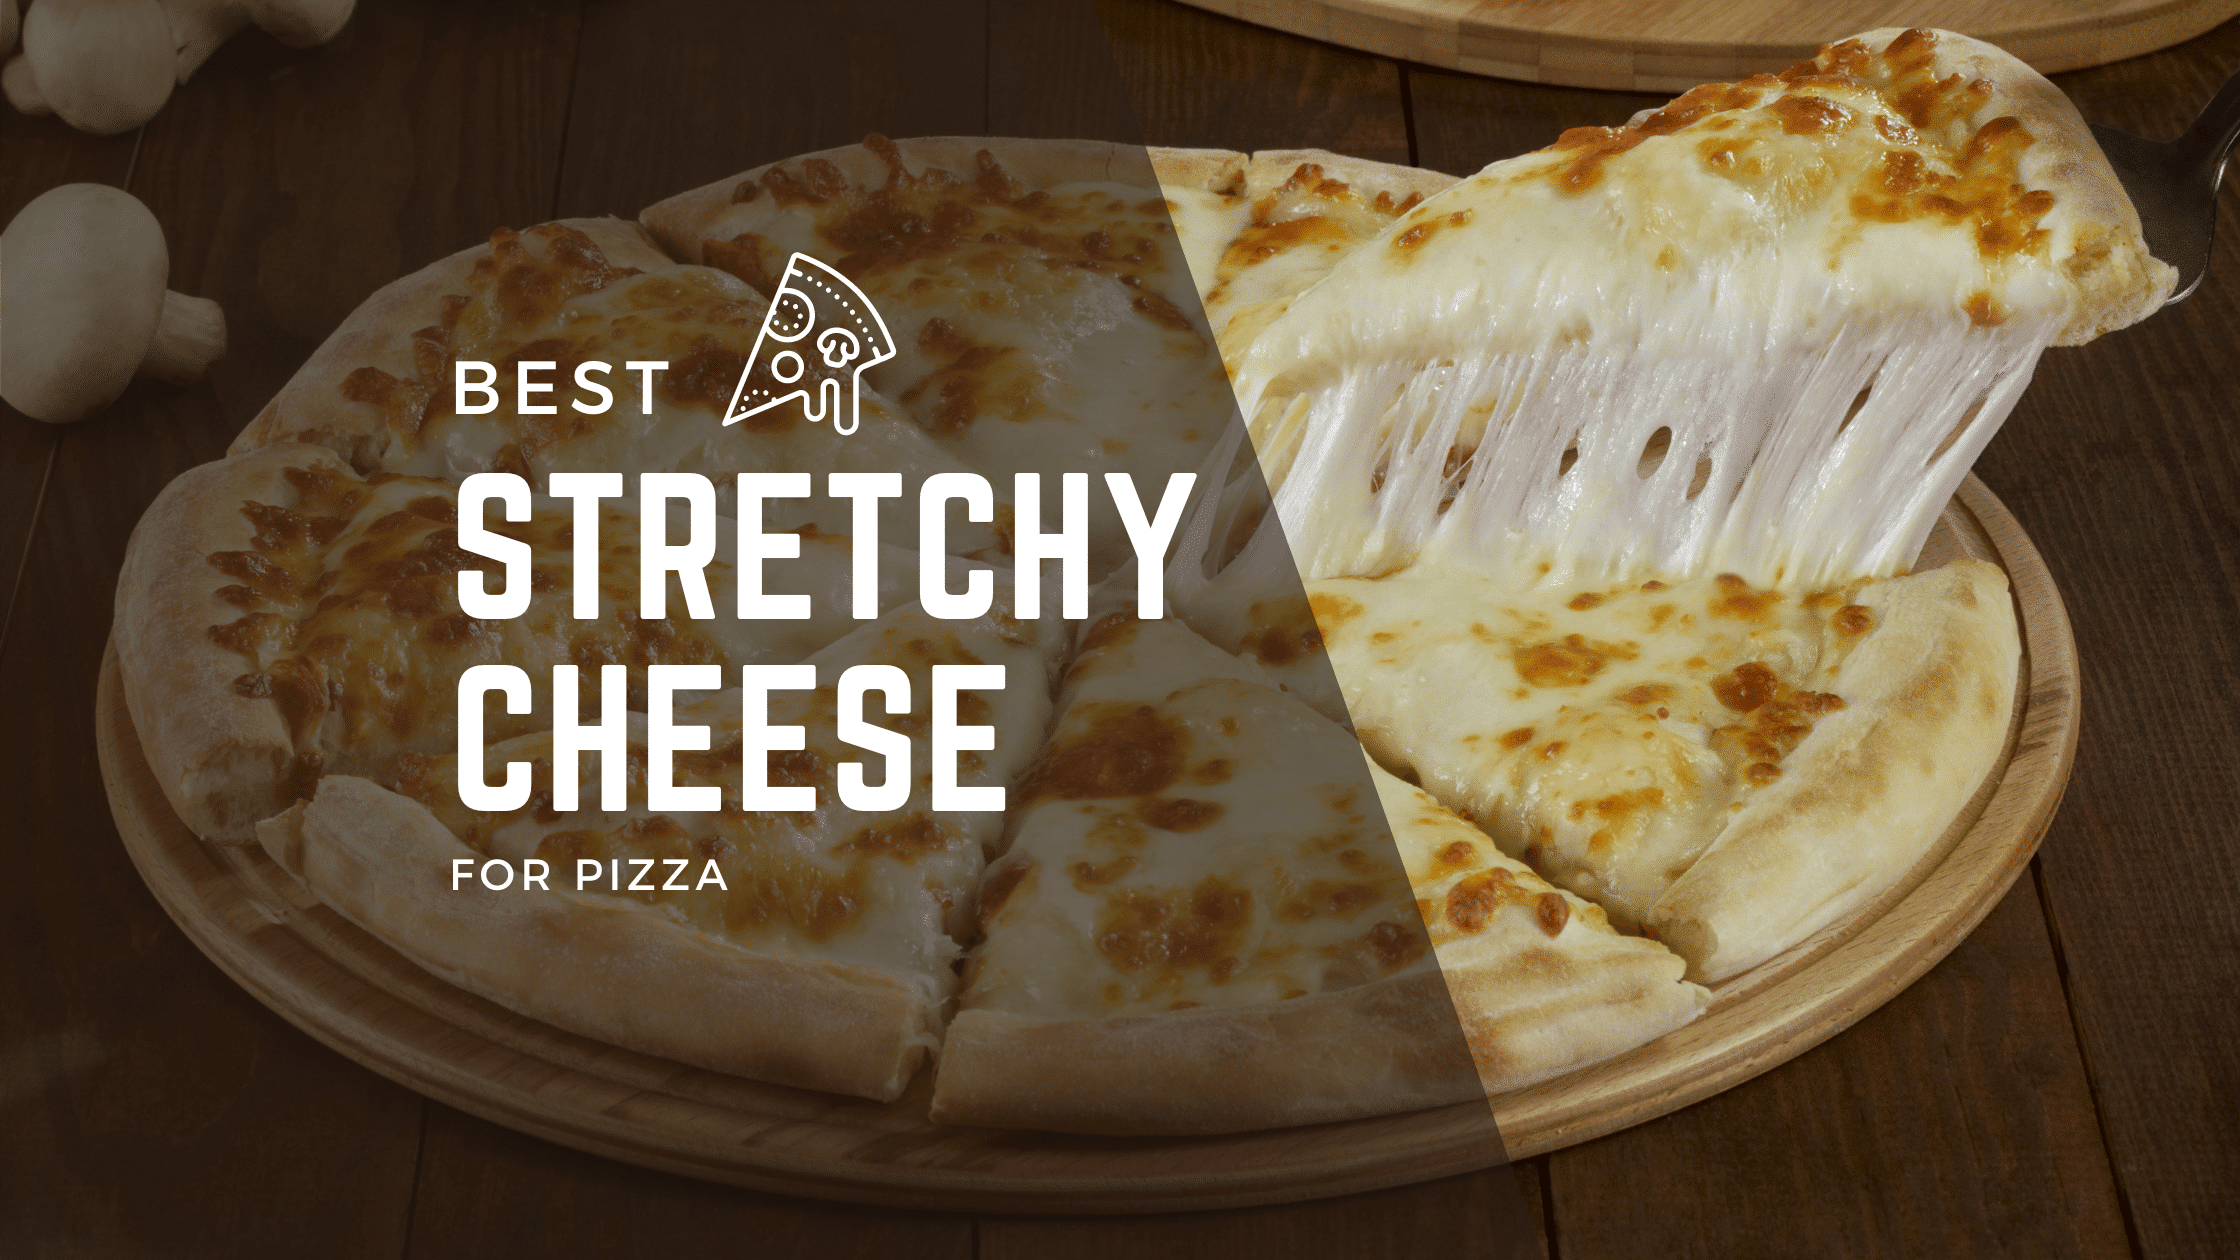 Best Stretchy Cheese for a Pizza – (Top 7 Stringy and Gooey Cheeses You Need to Try)